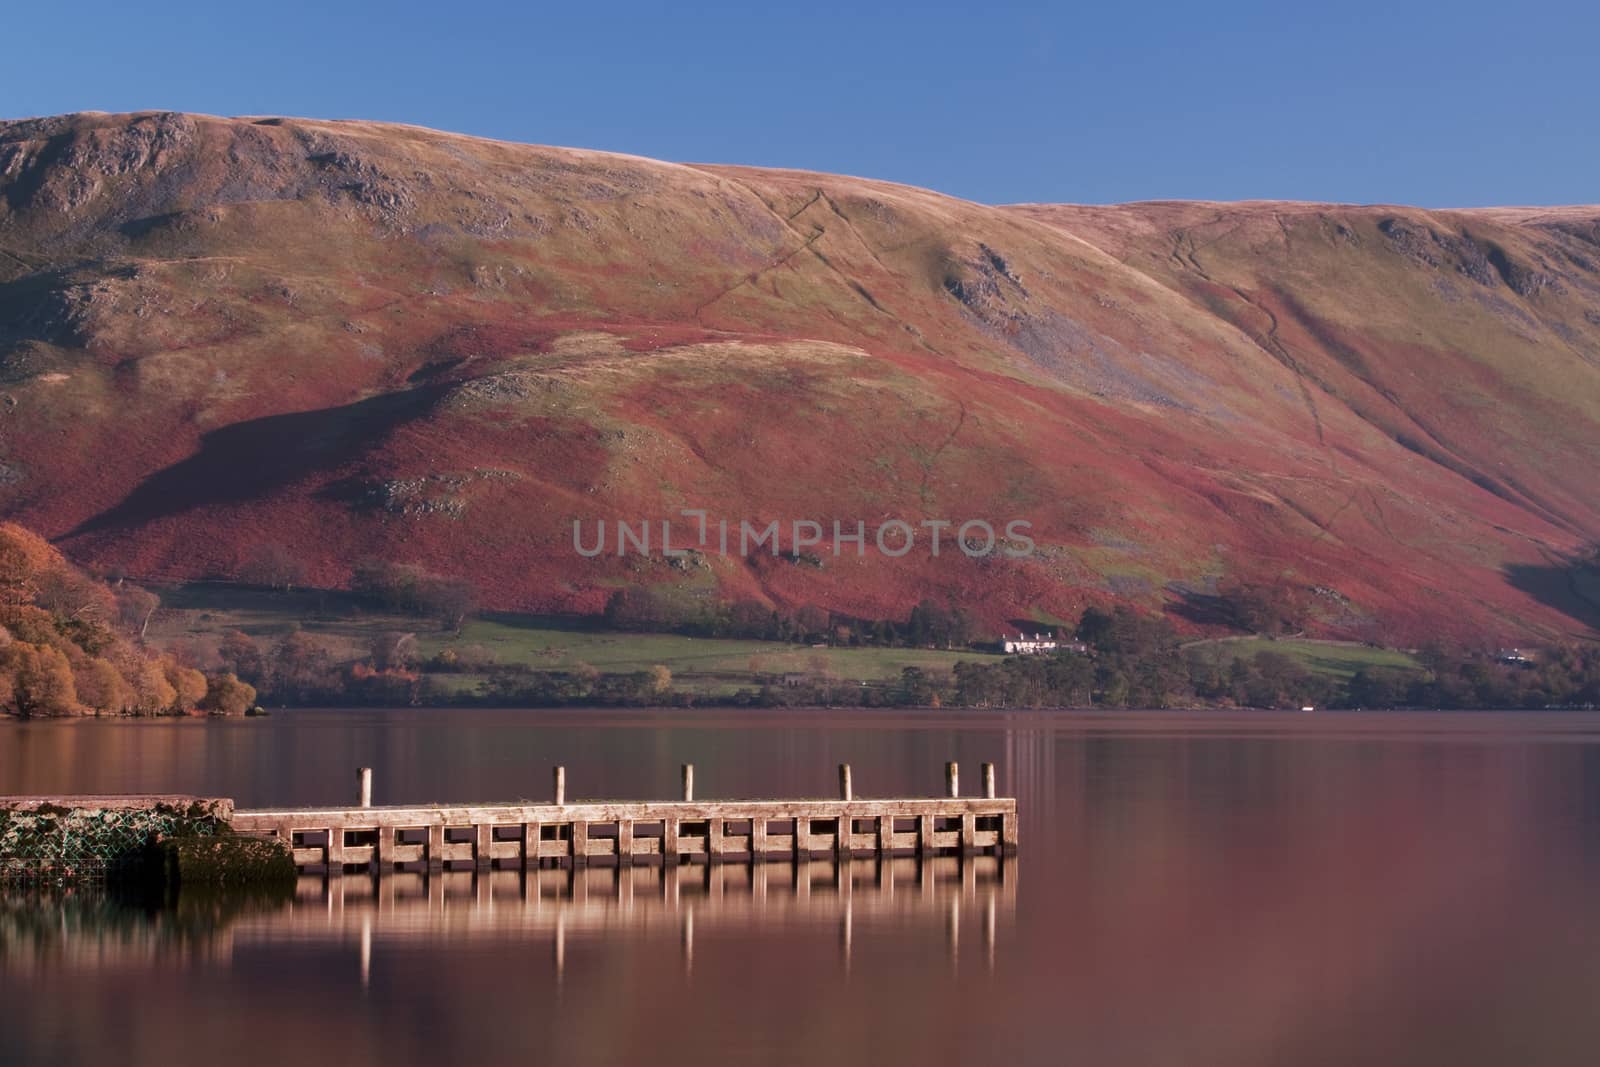 The pier is a landing stage on the banks of Ullswater, Cumbria in the English Lake District national park.